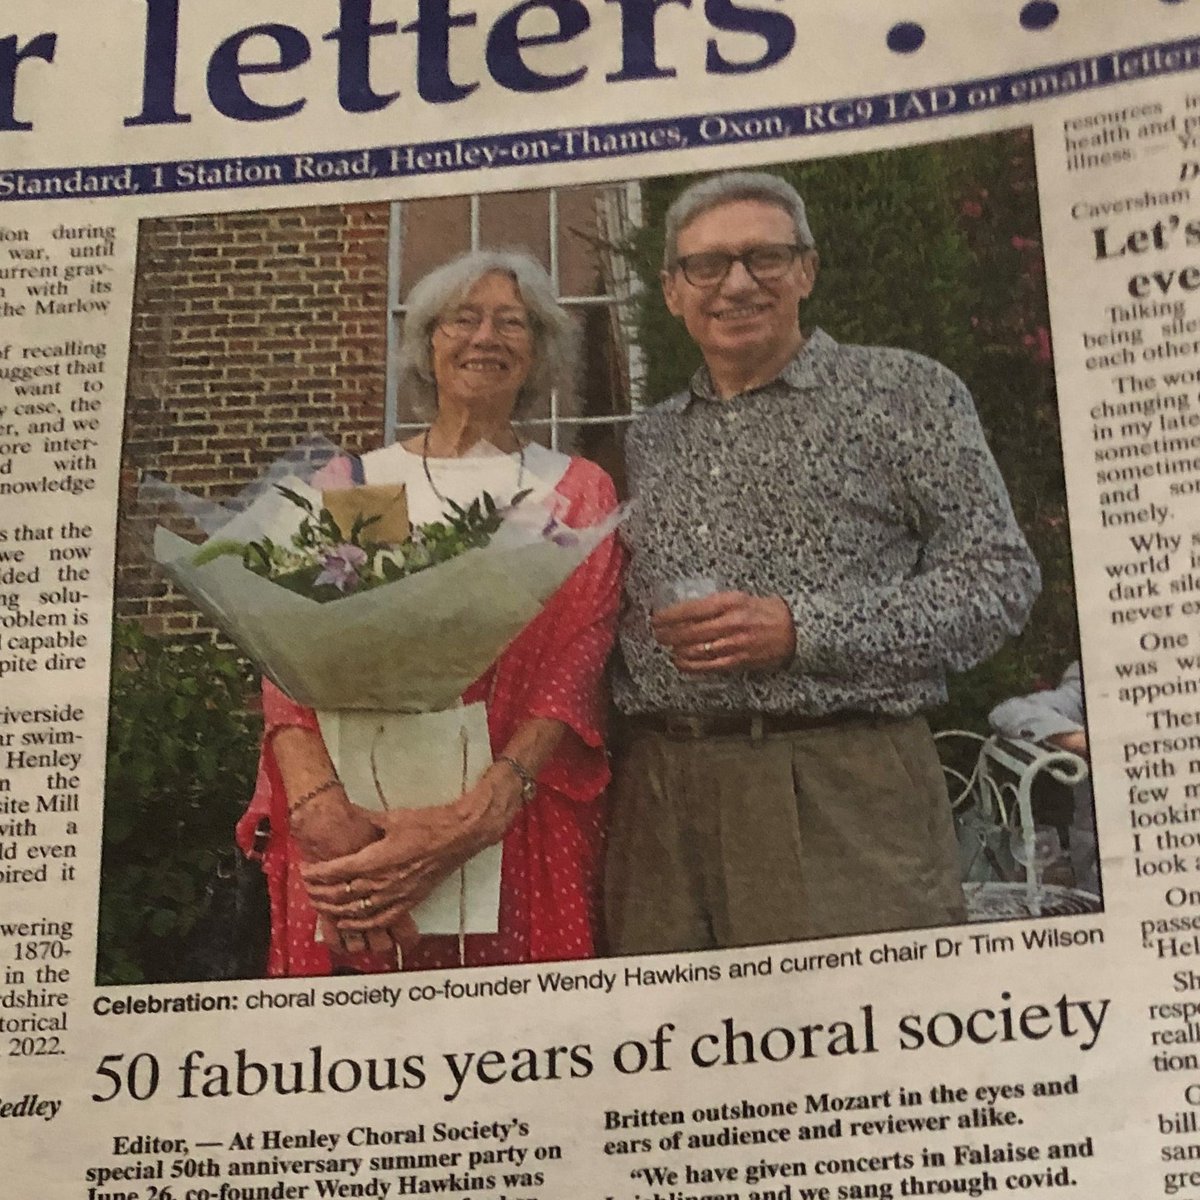 Check out todays @henleystandard for a love letter about #music #singing #choralmusic from our wonderful co-founder Wendy Hawkins. We may not all be able to sing at #BBCProms starting tonight but we can sing with a fab local choir. If you are local to #henley - join us! 🎶🎶🎶